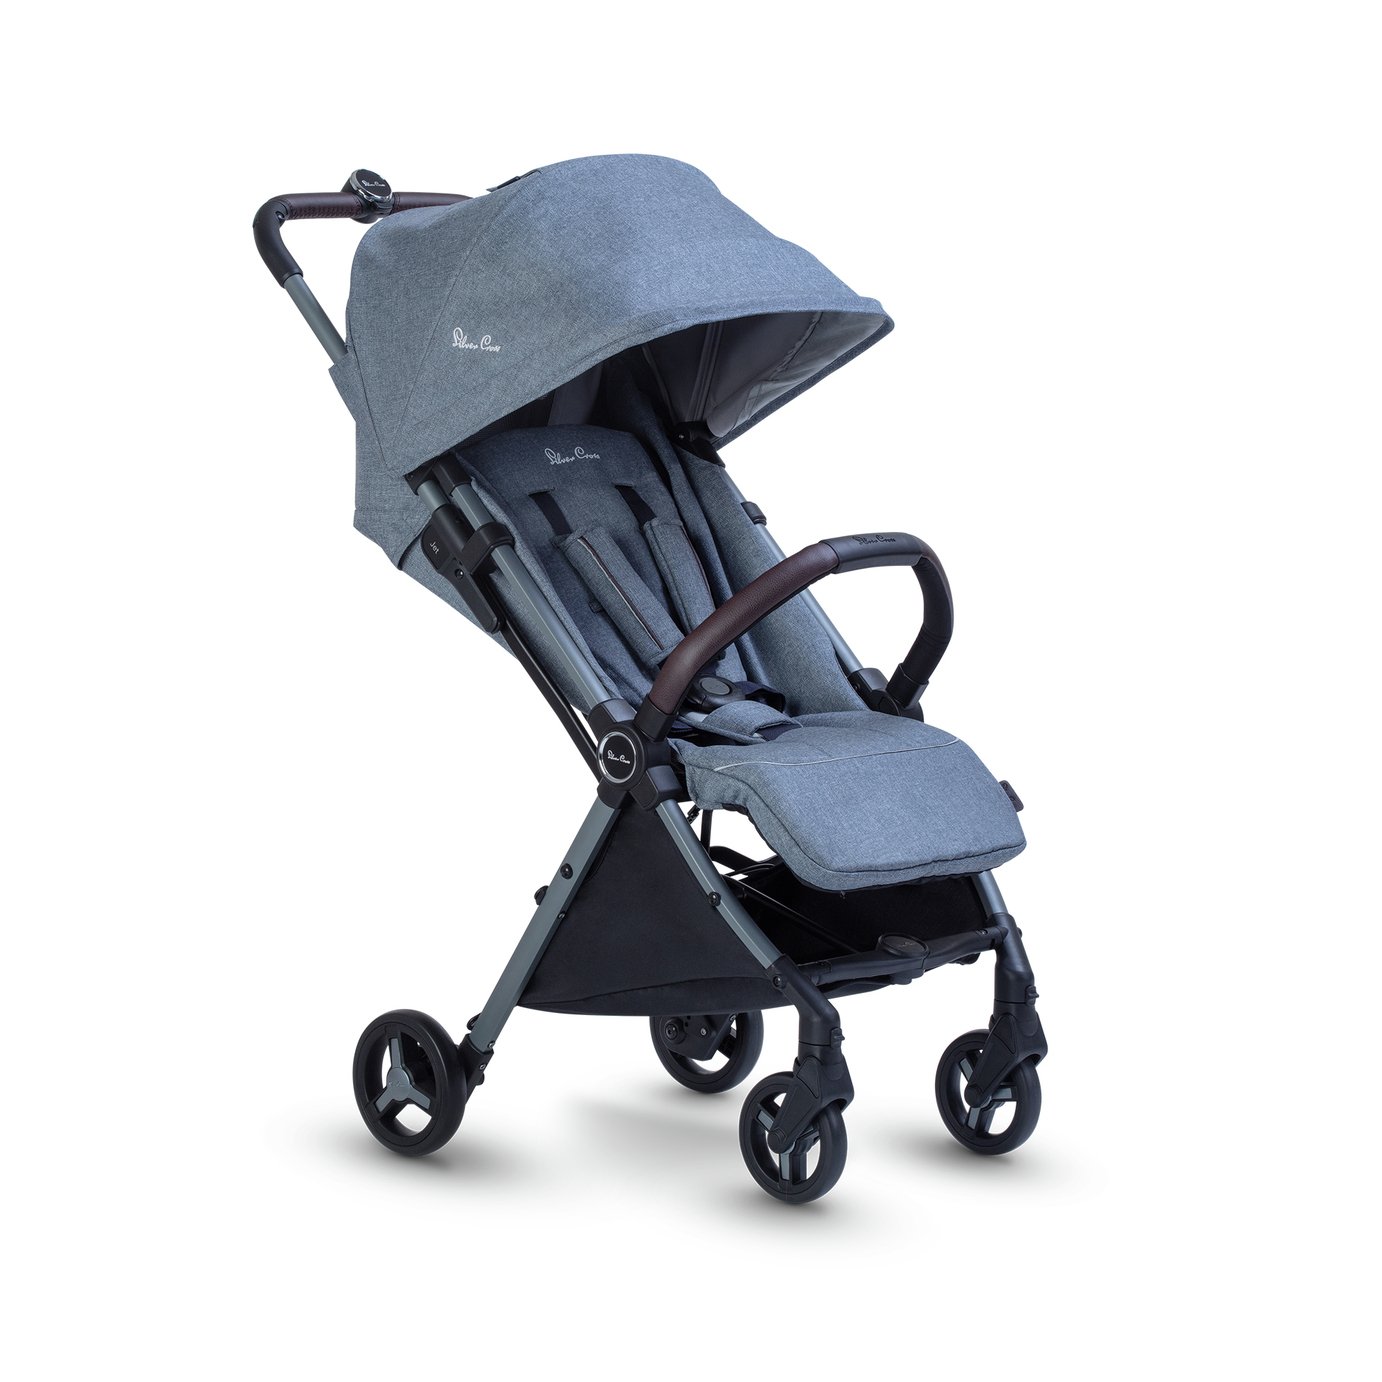 Silver Cross Jet Special Edition Ocean Stroller Review